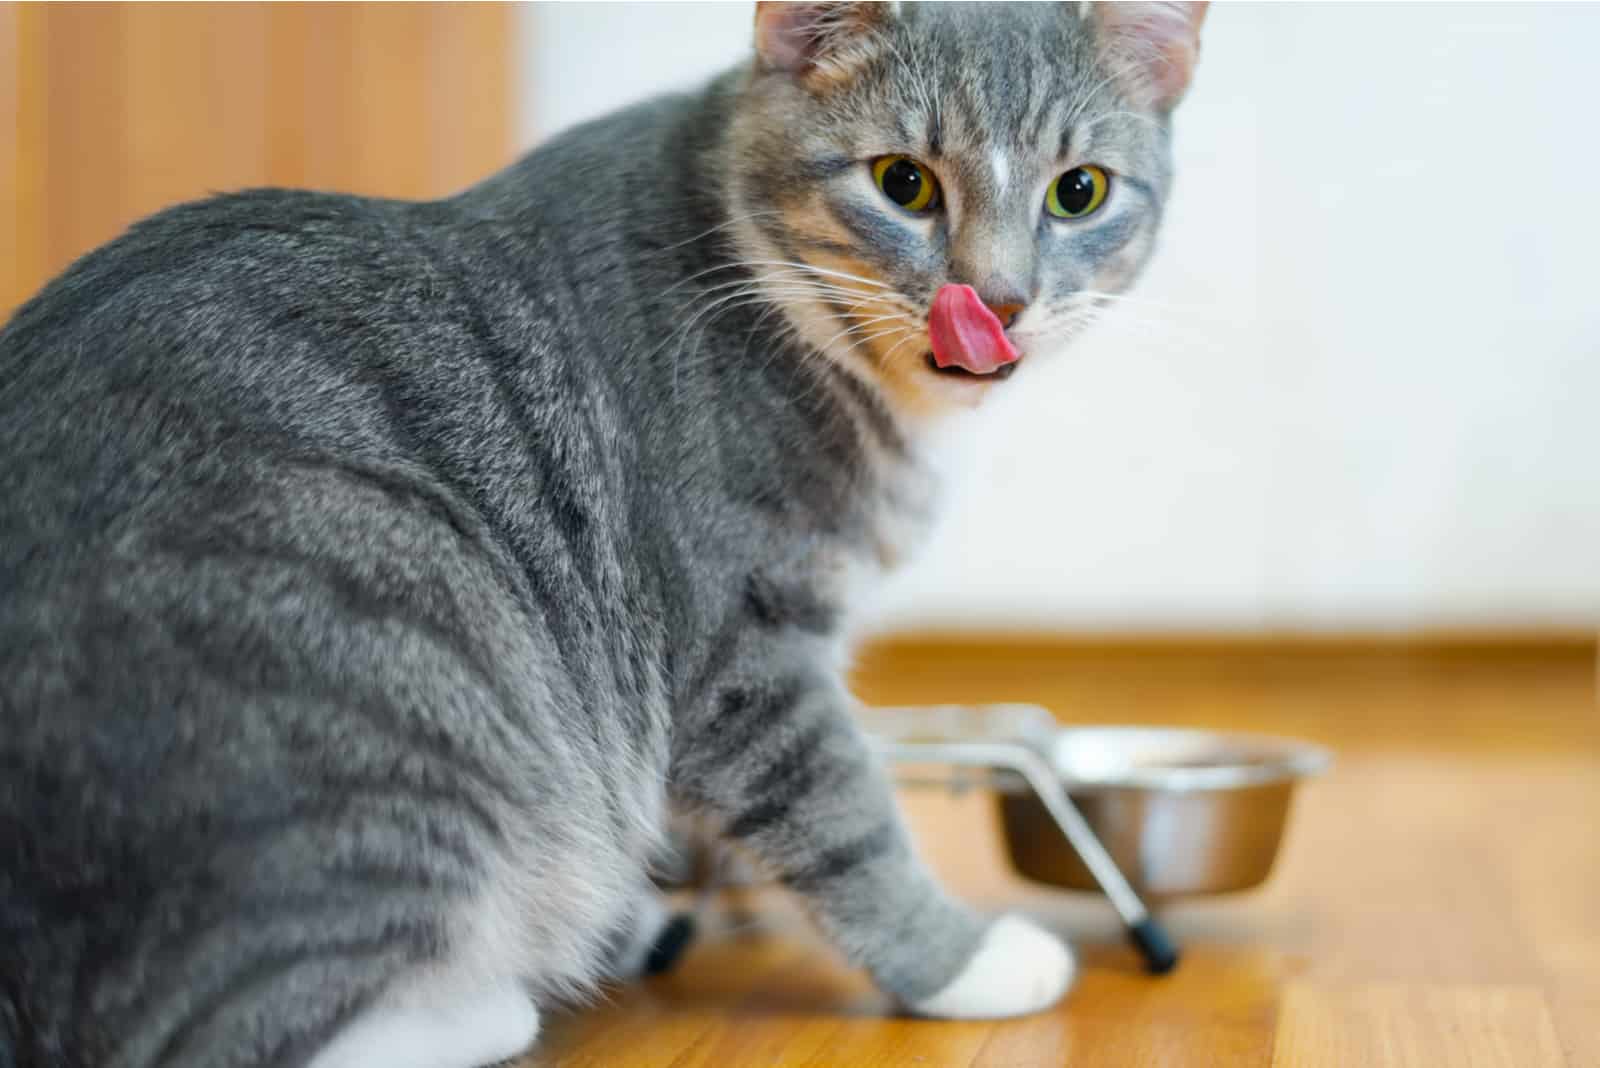 young cat after eating food from a plate showing tongue